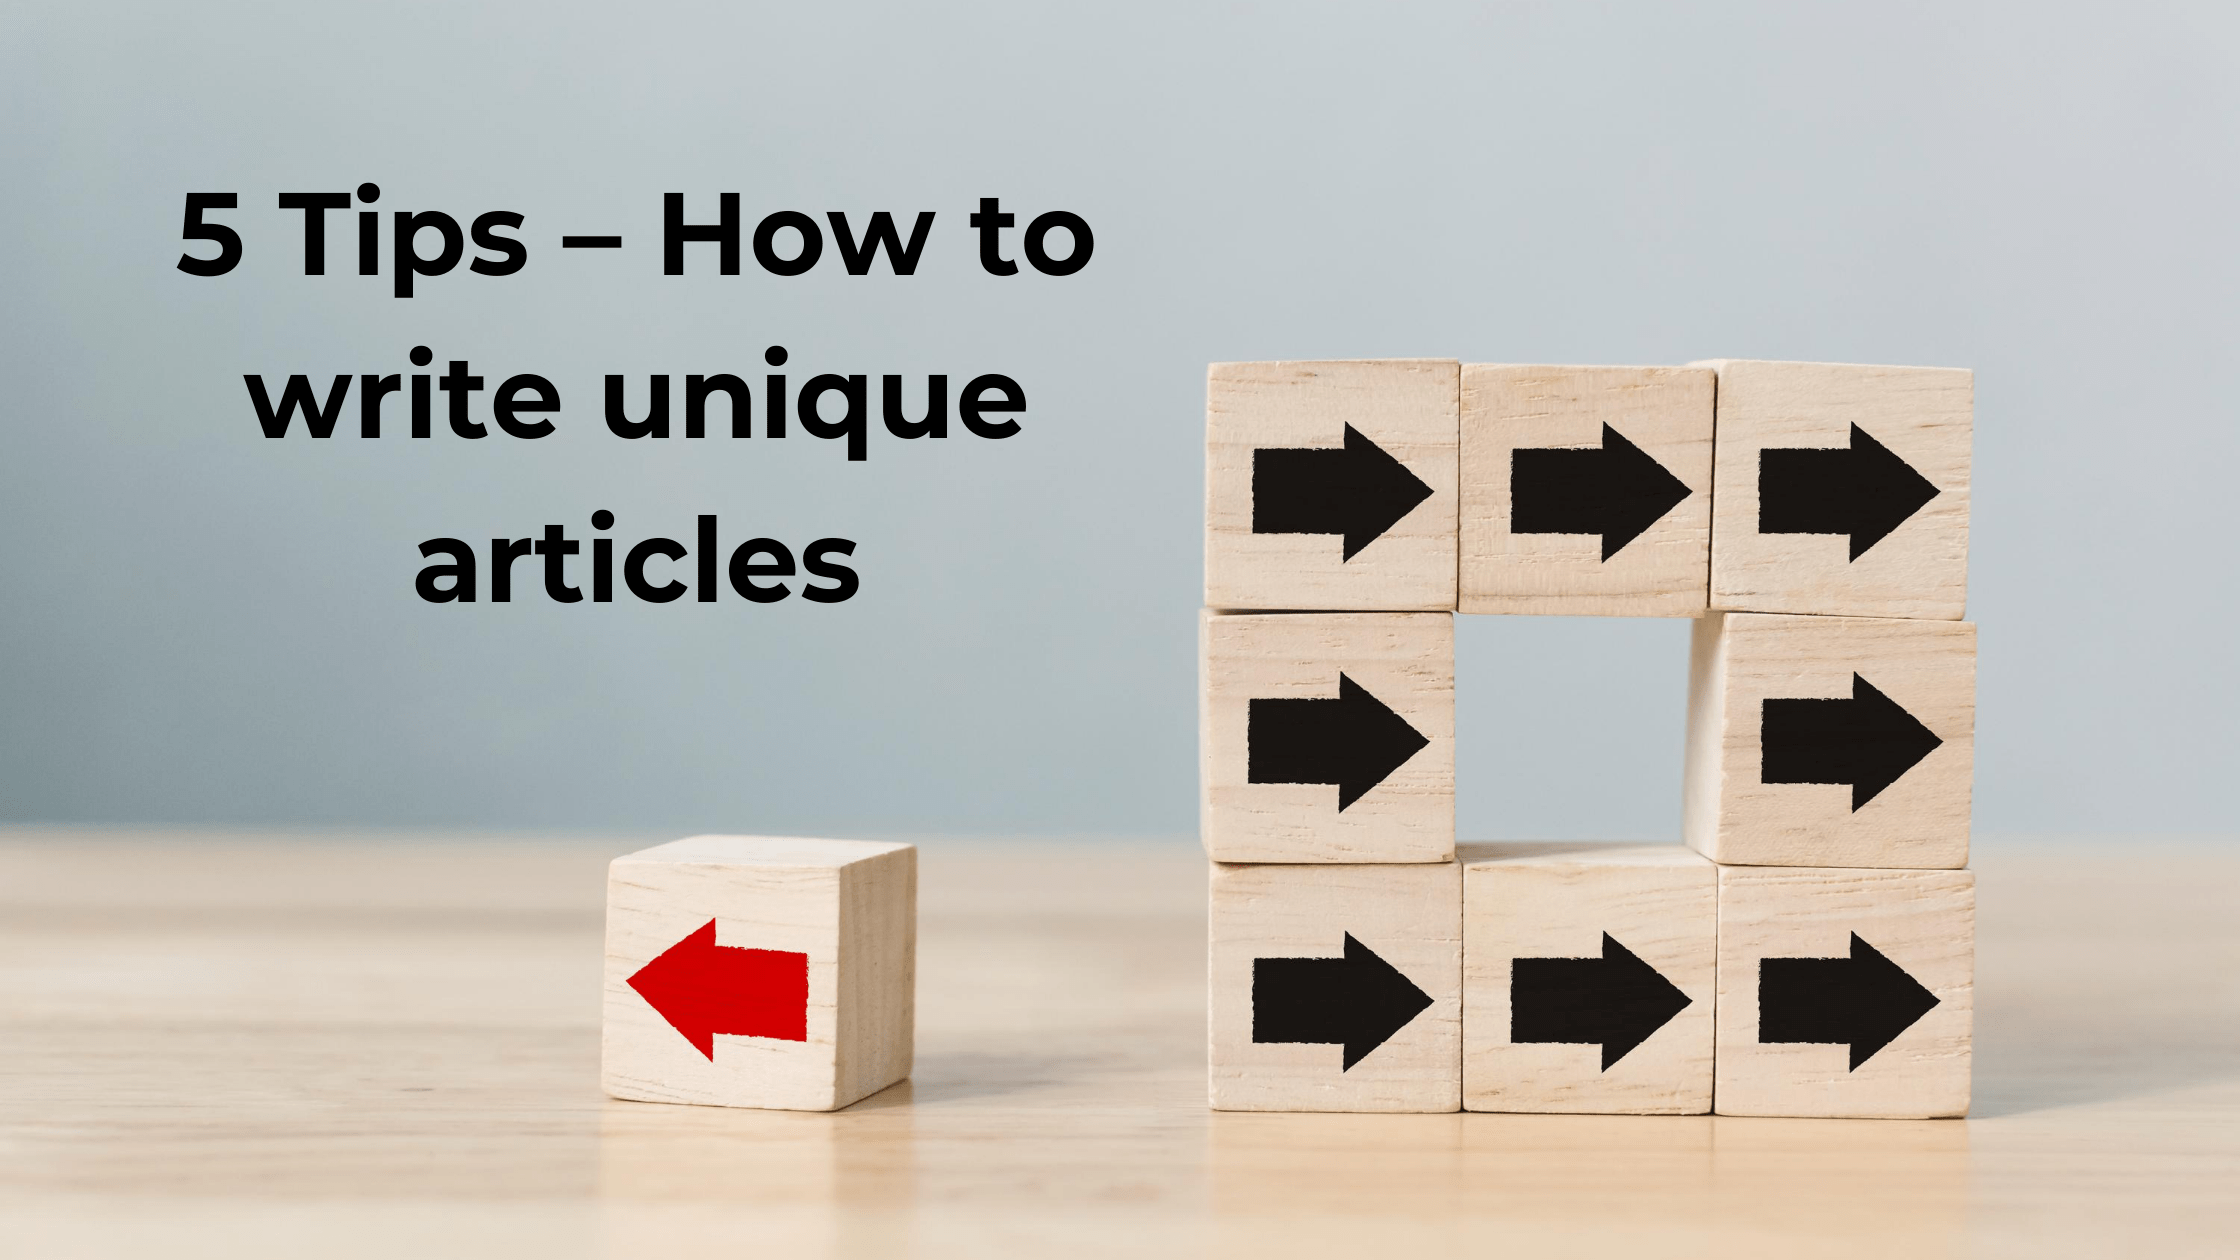 How to Write Unique Articles the Easy Way – 5 Tips Listed